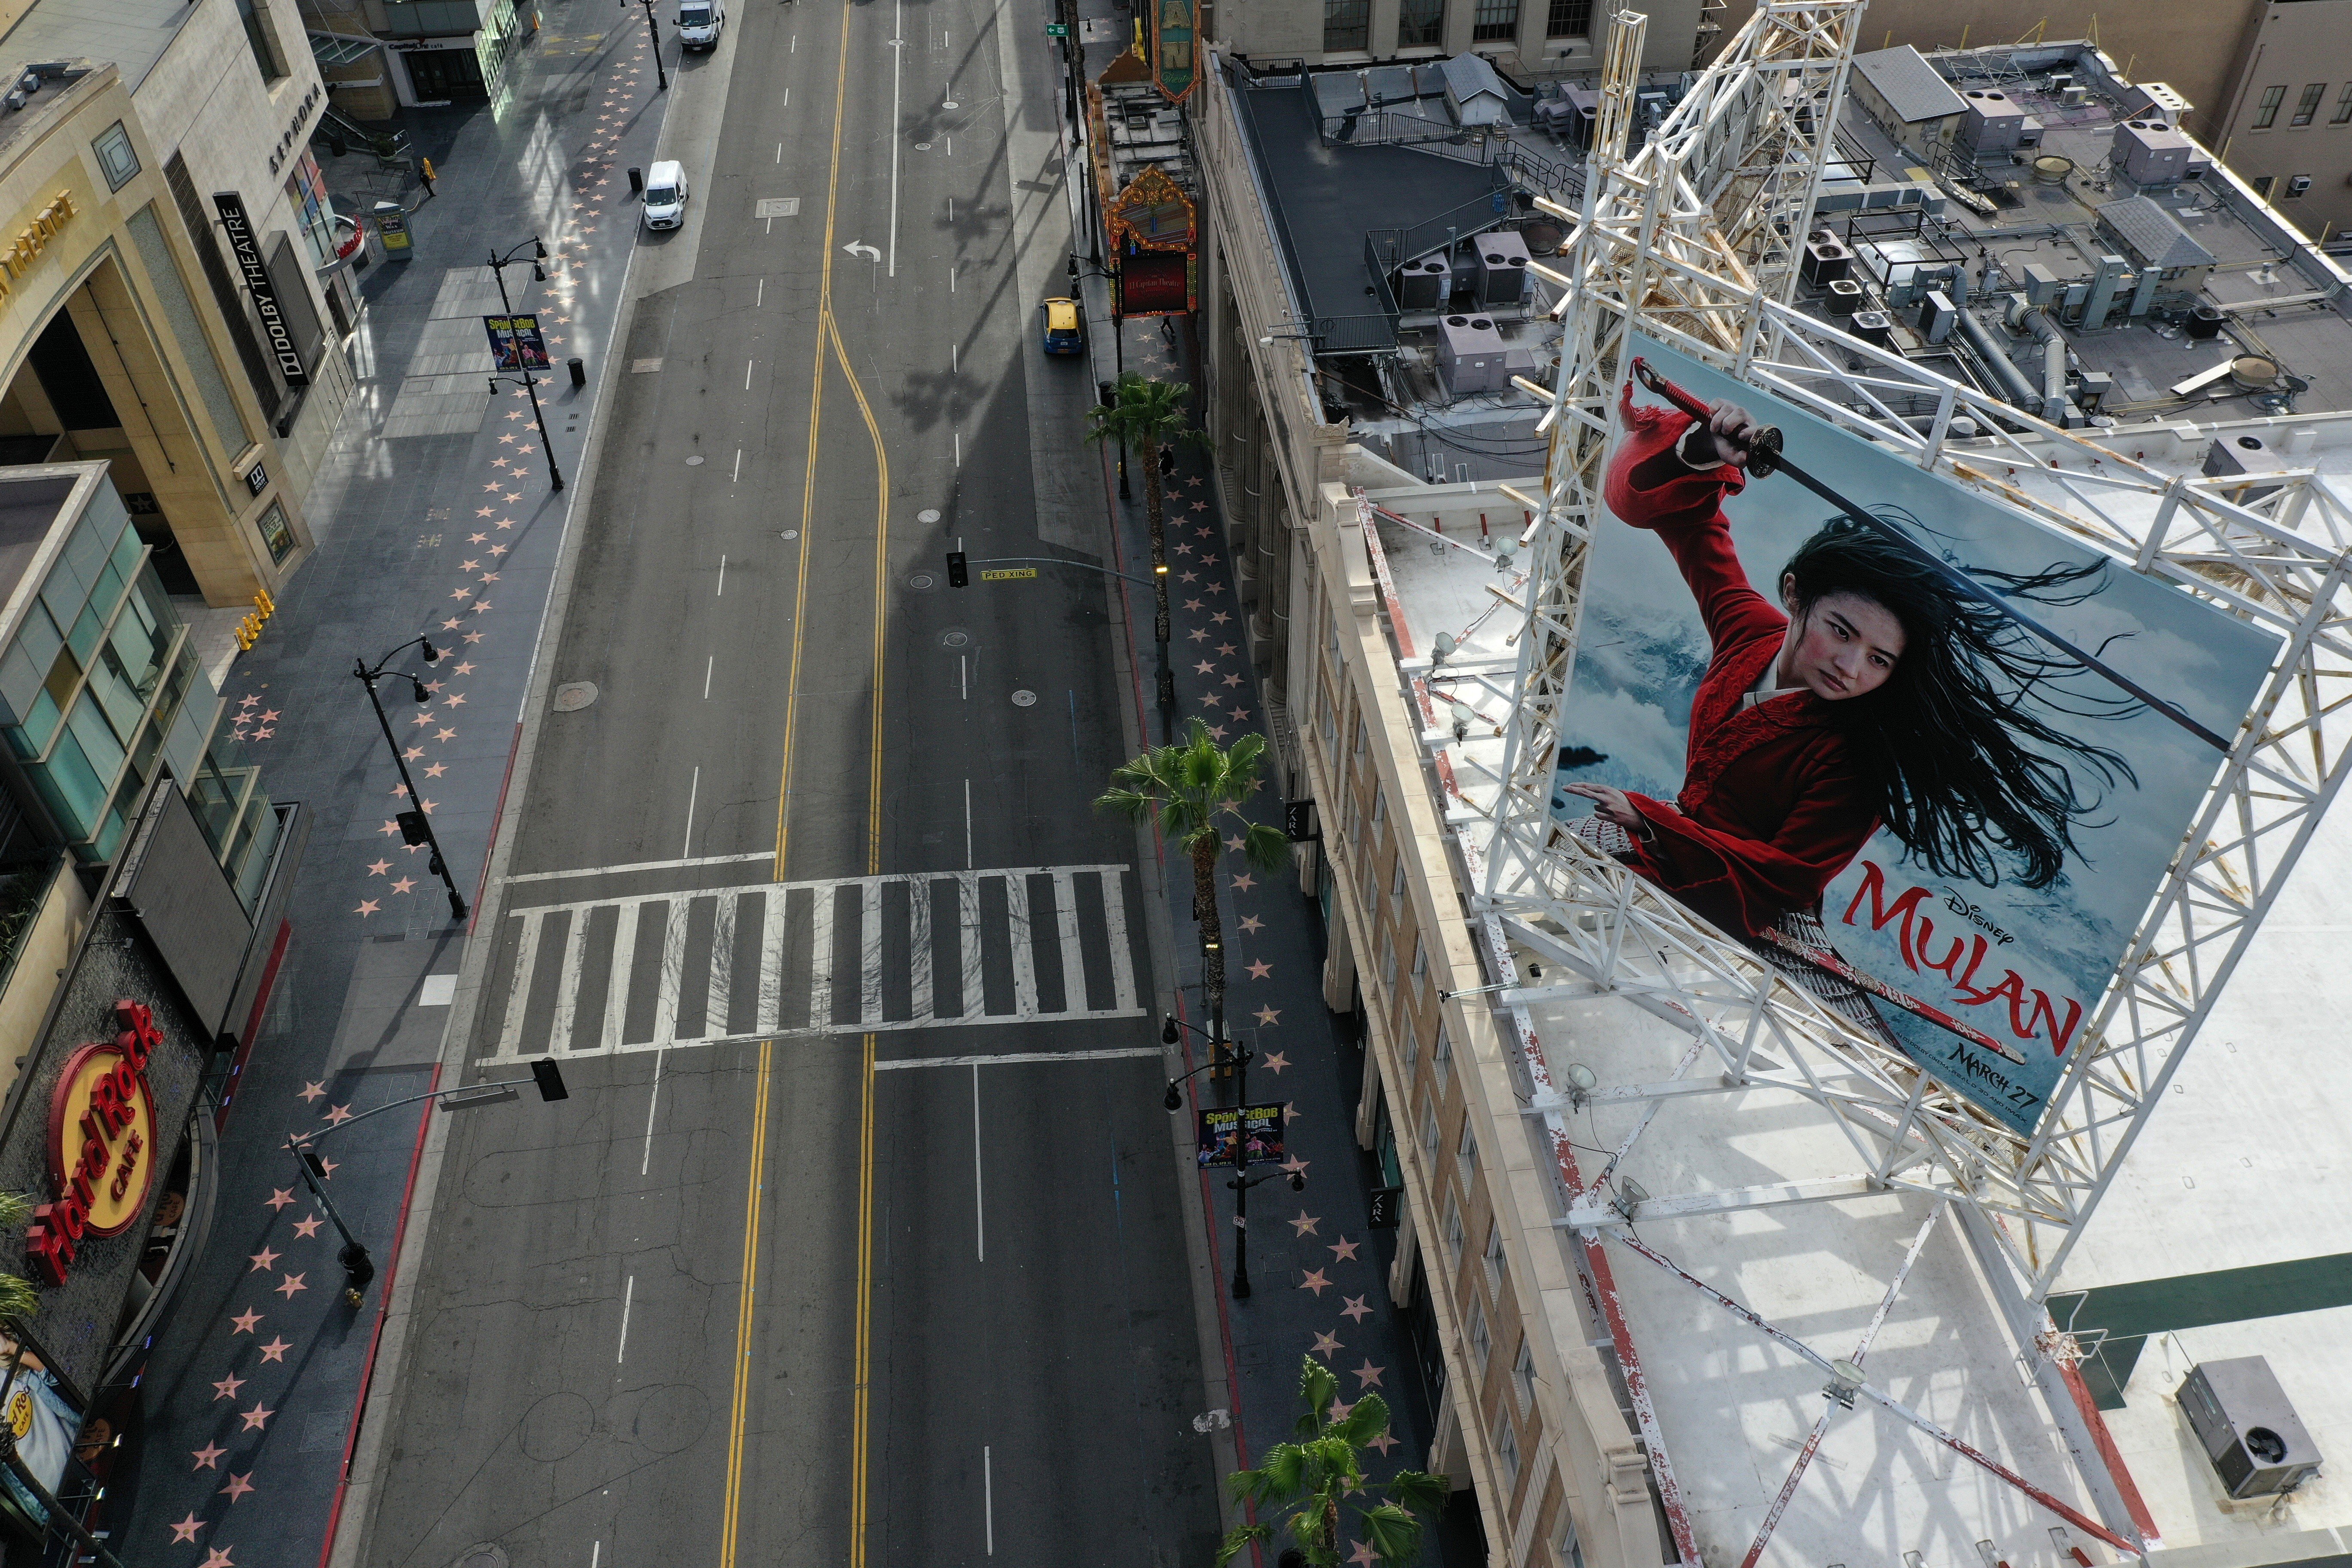 A poster for the Disney movie “Mulan” towers over an empty Hollywood Boulevard in Los Angeles during the coronavirus pandemic in March 2020. Photo: Reuters